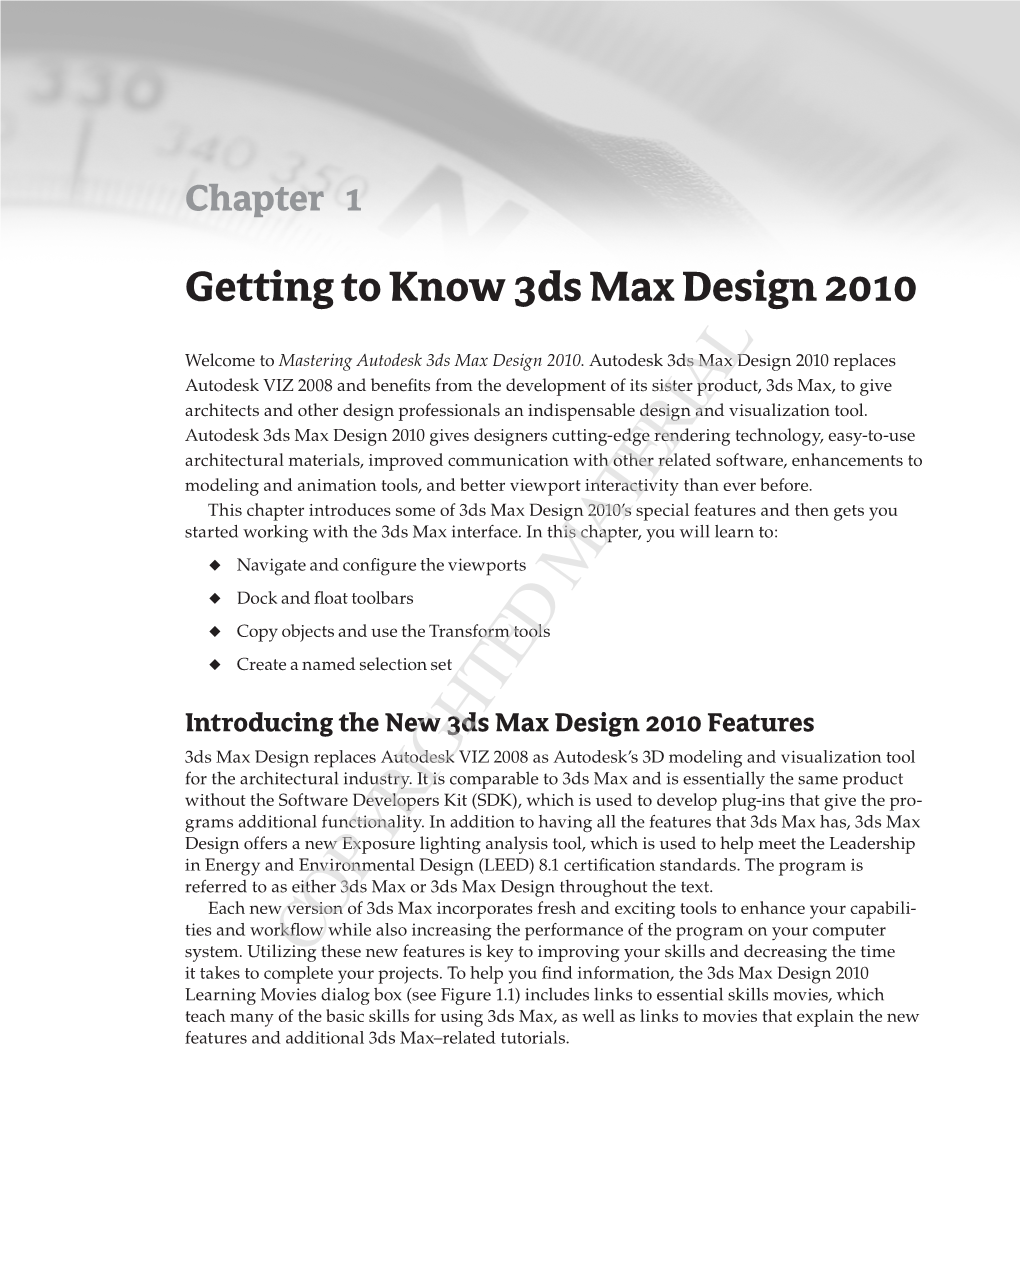 Introducing the New 3Ds Max Design 2010